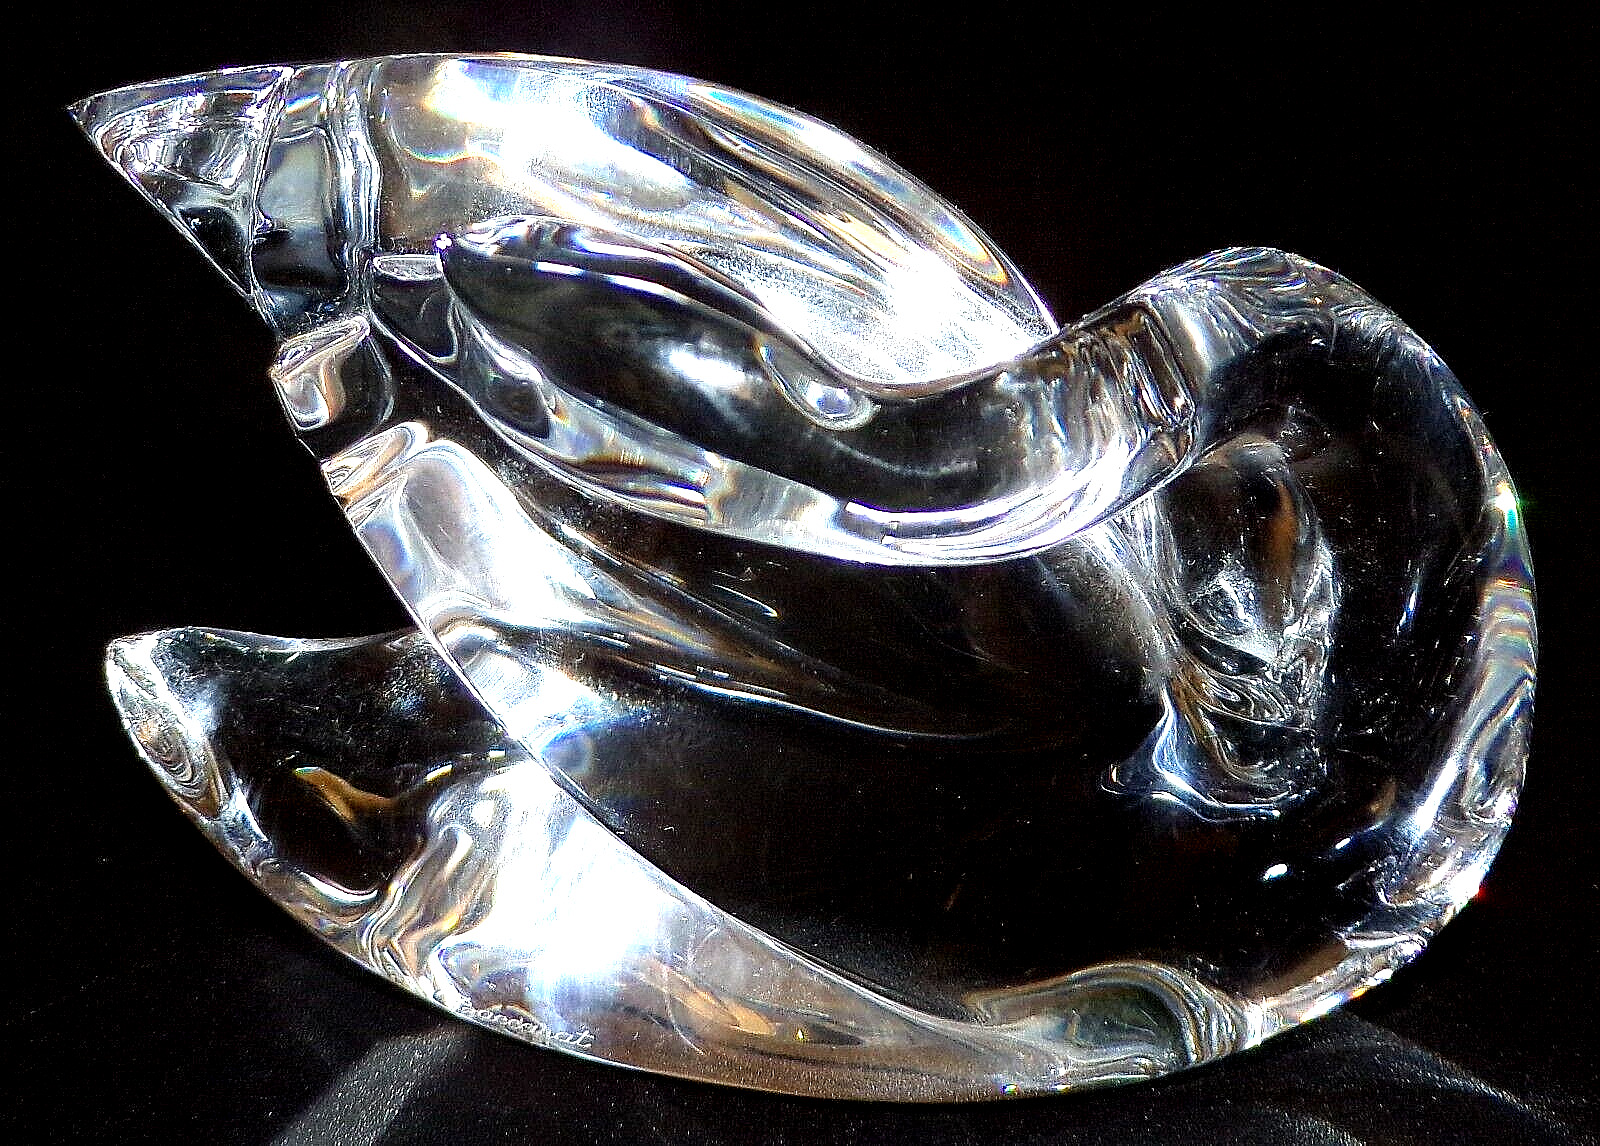 BACCARAT France SIGNED Modernist LARGE Swan ART GLASS FIGURINE PAPERWEIGHT